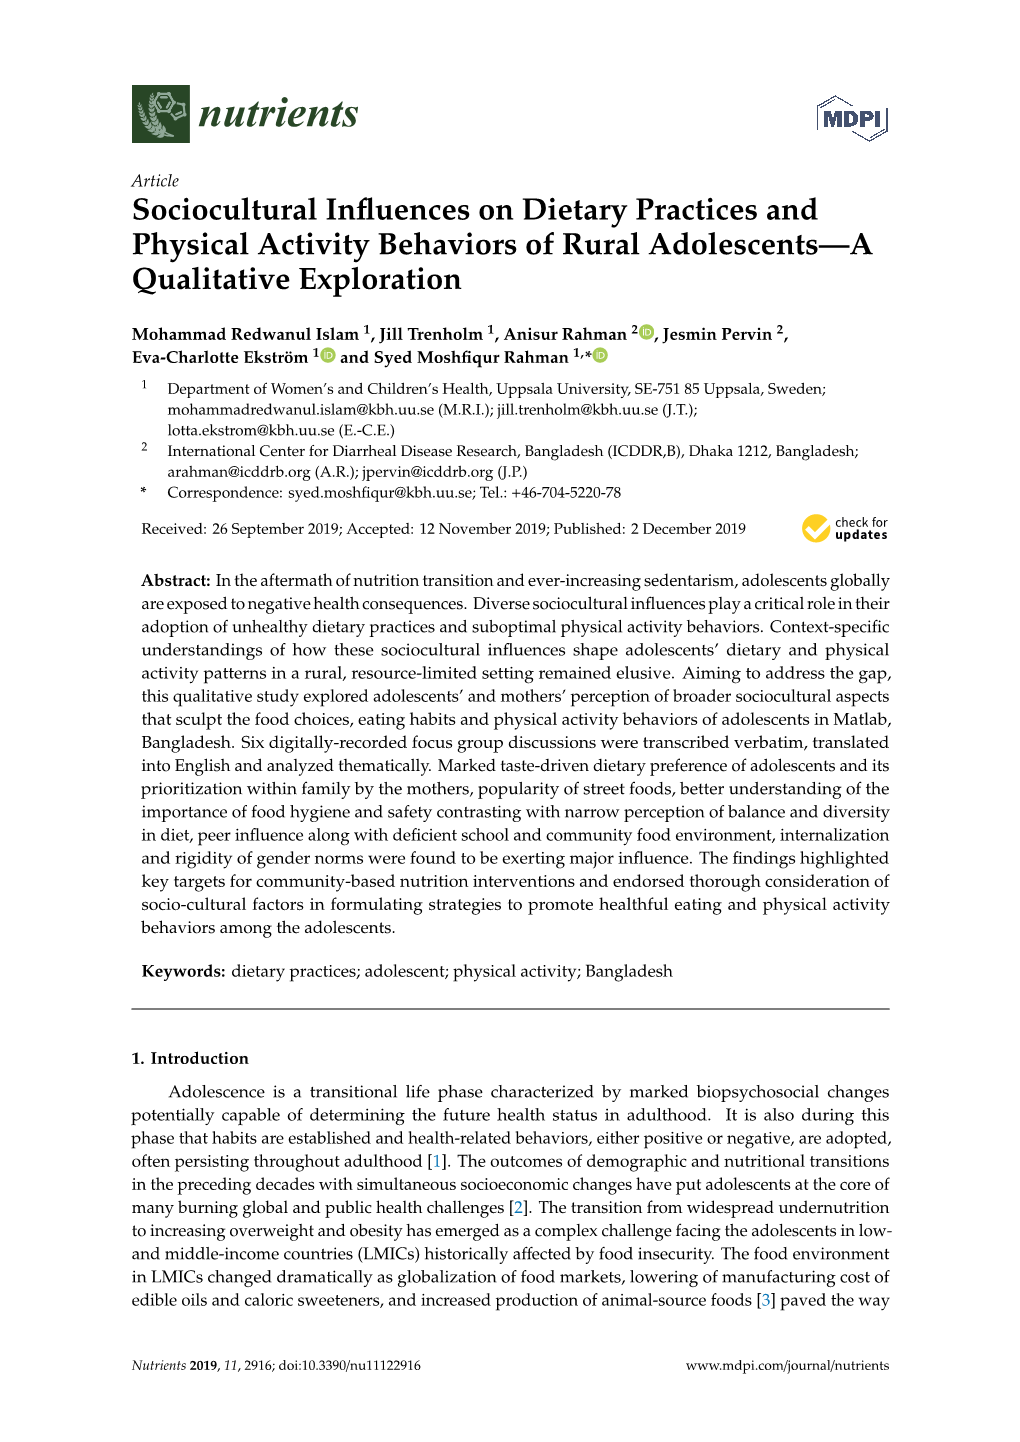 Sociocultural Influences on Dietary Practices and Physical Activity